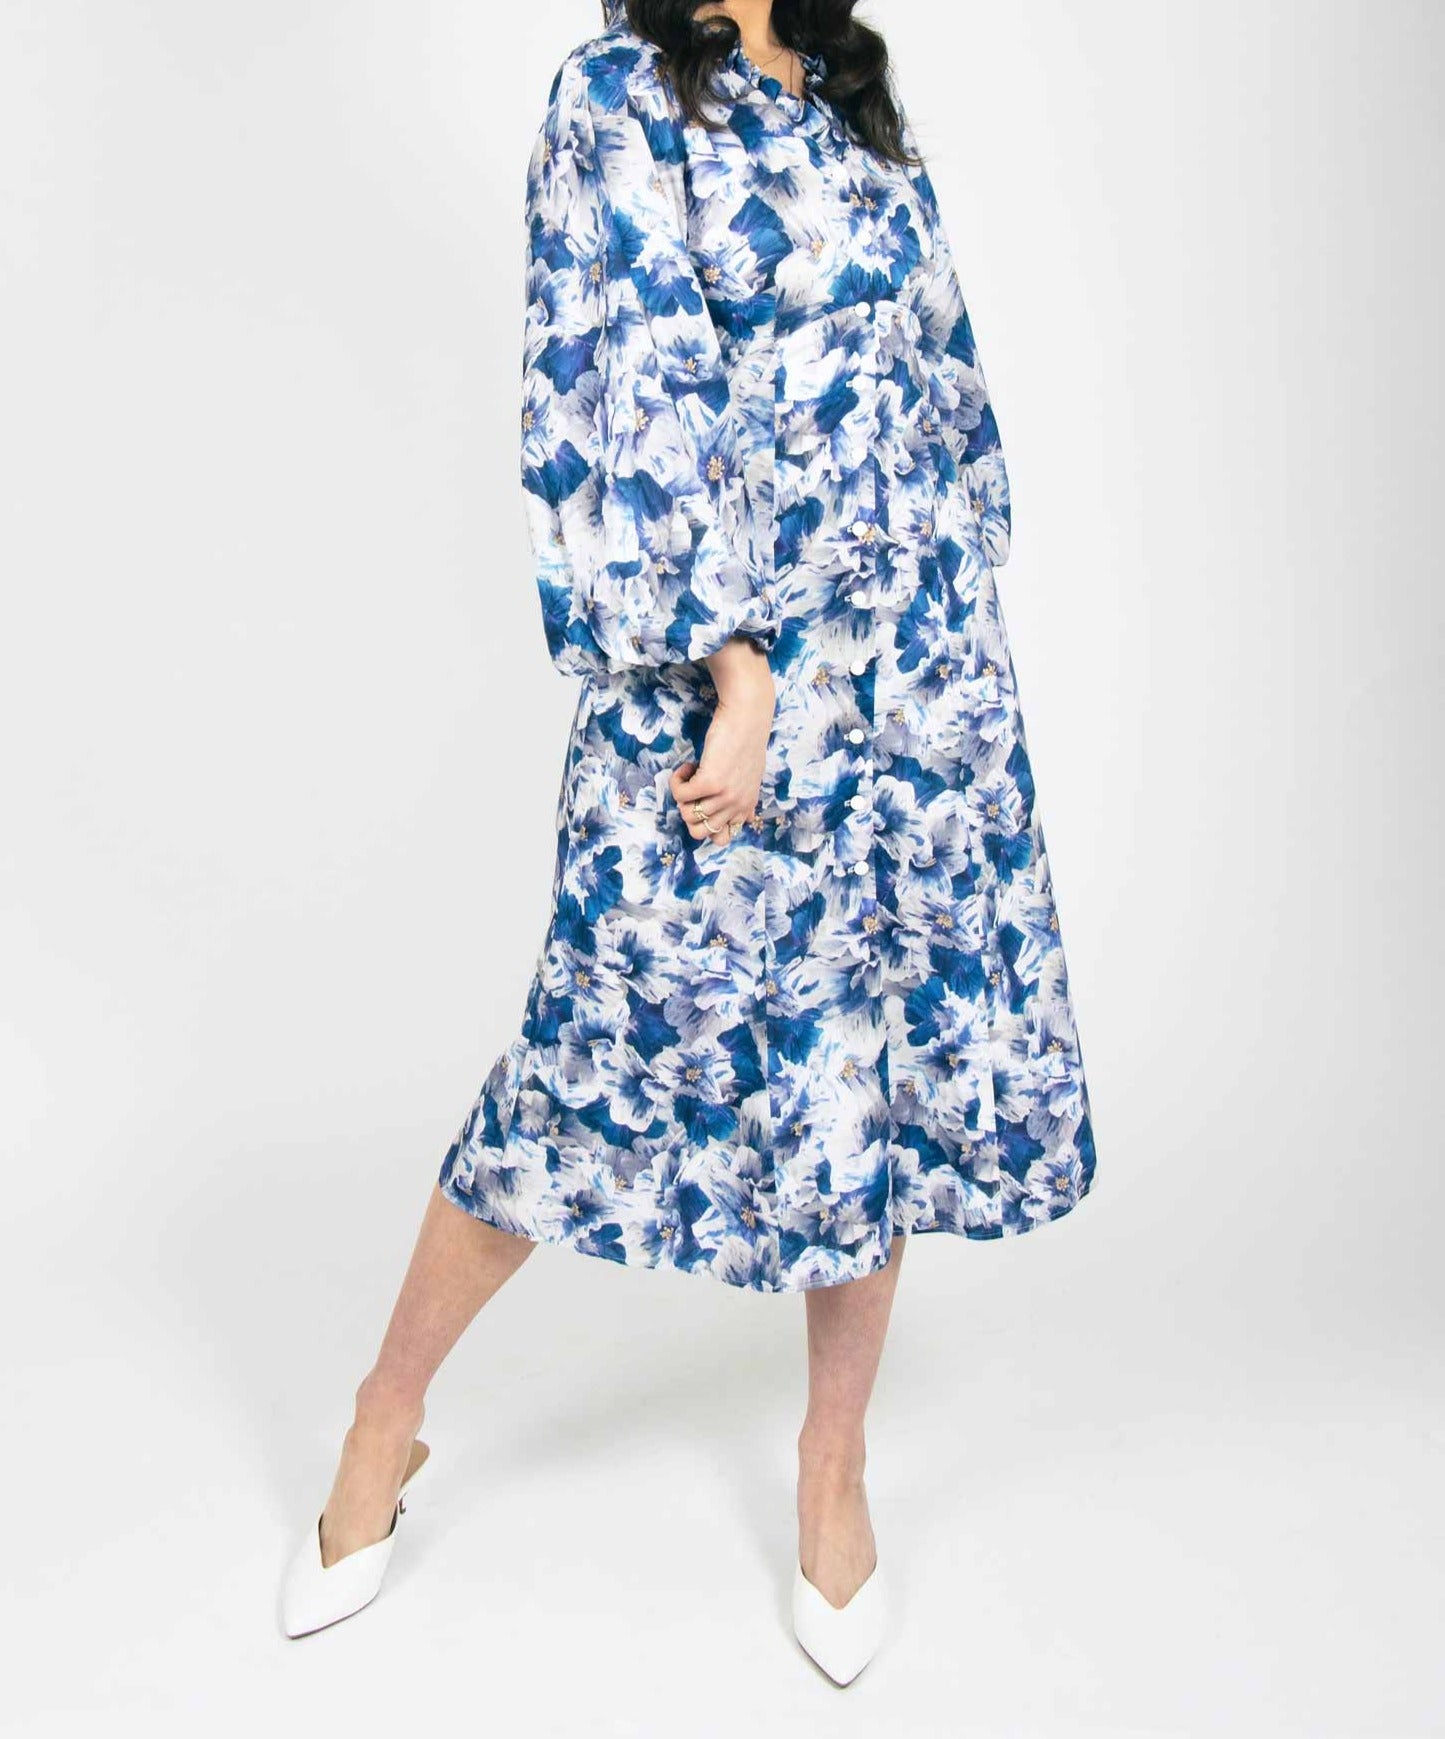 blue and white floral mid length dress with puff sleeves and button up front